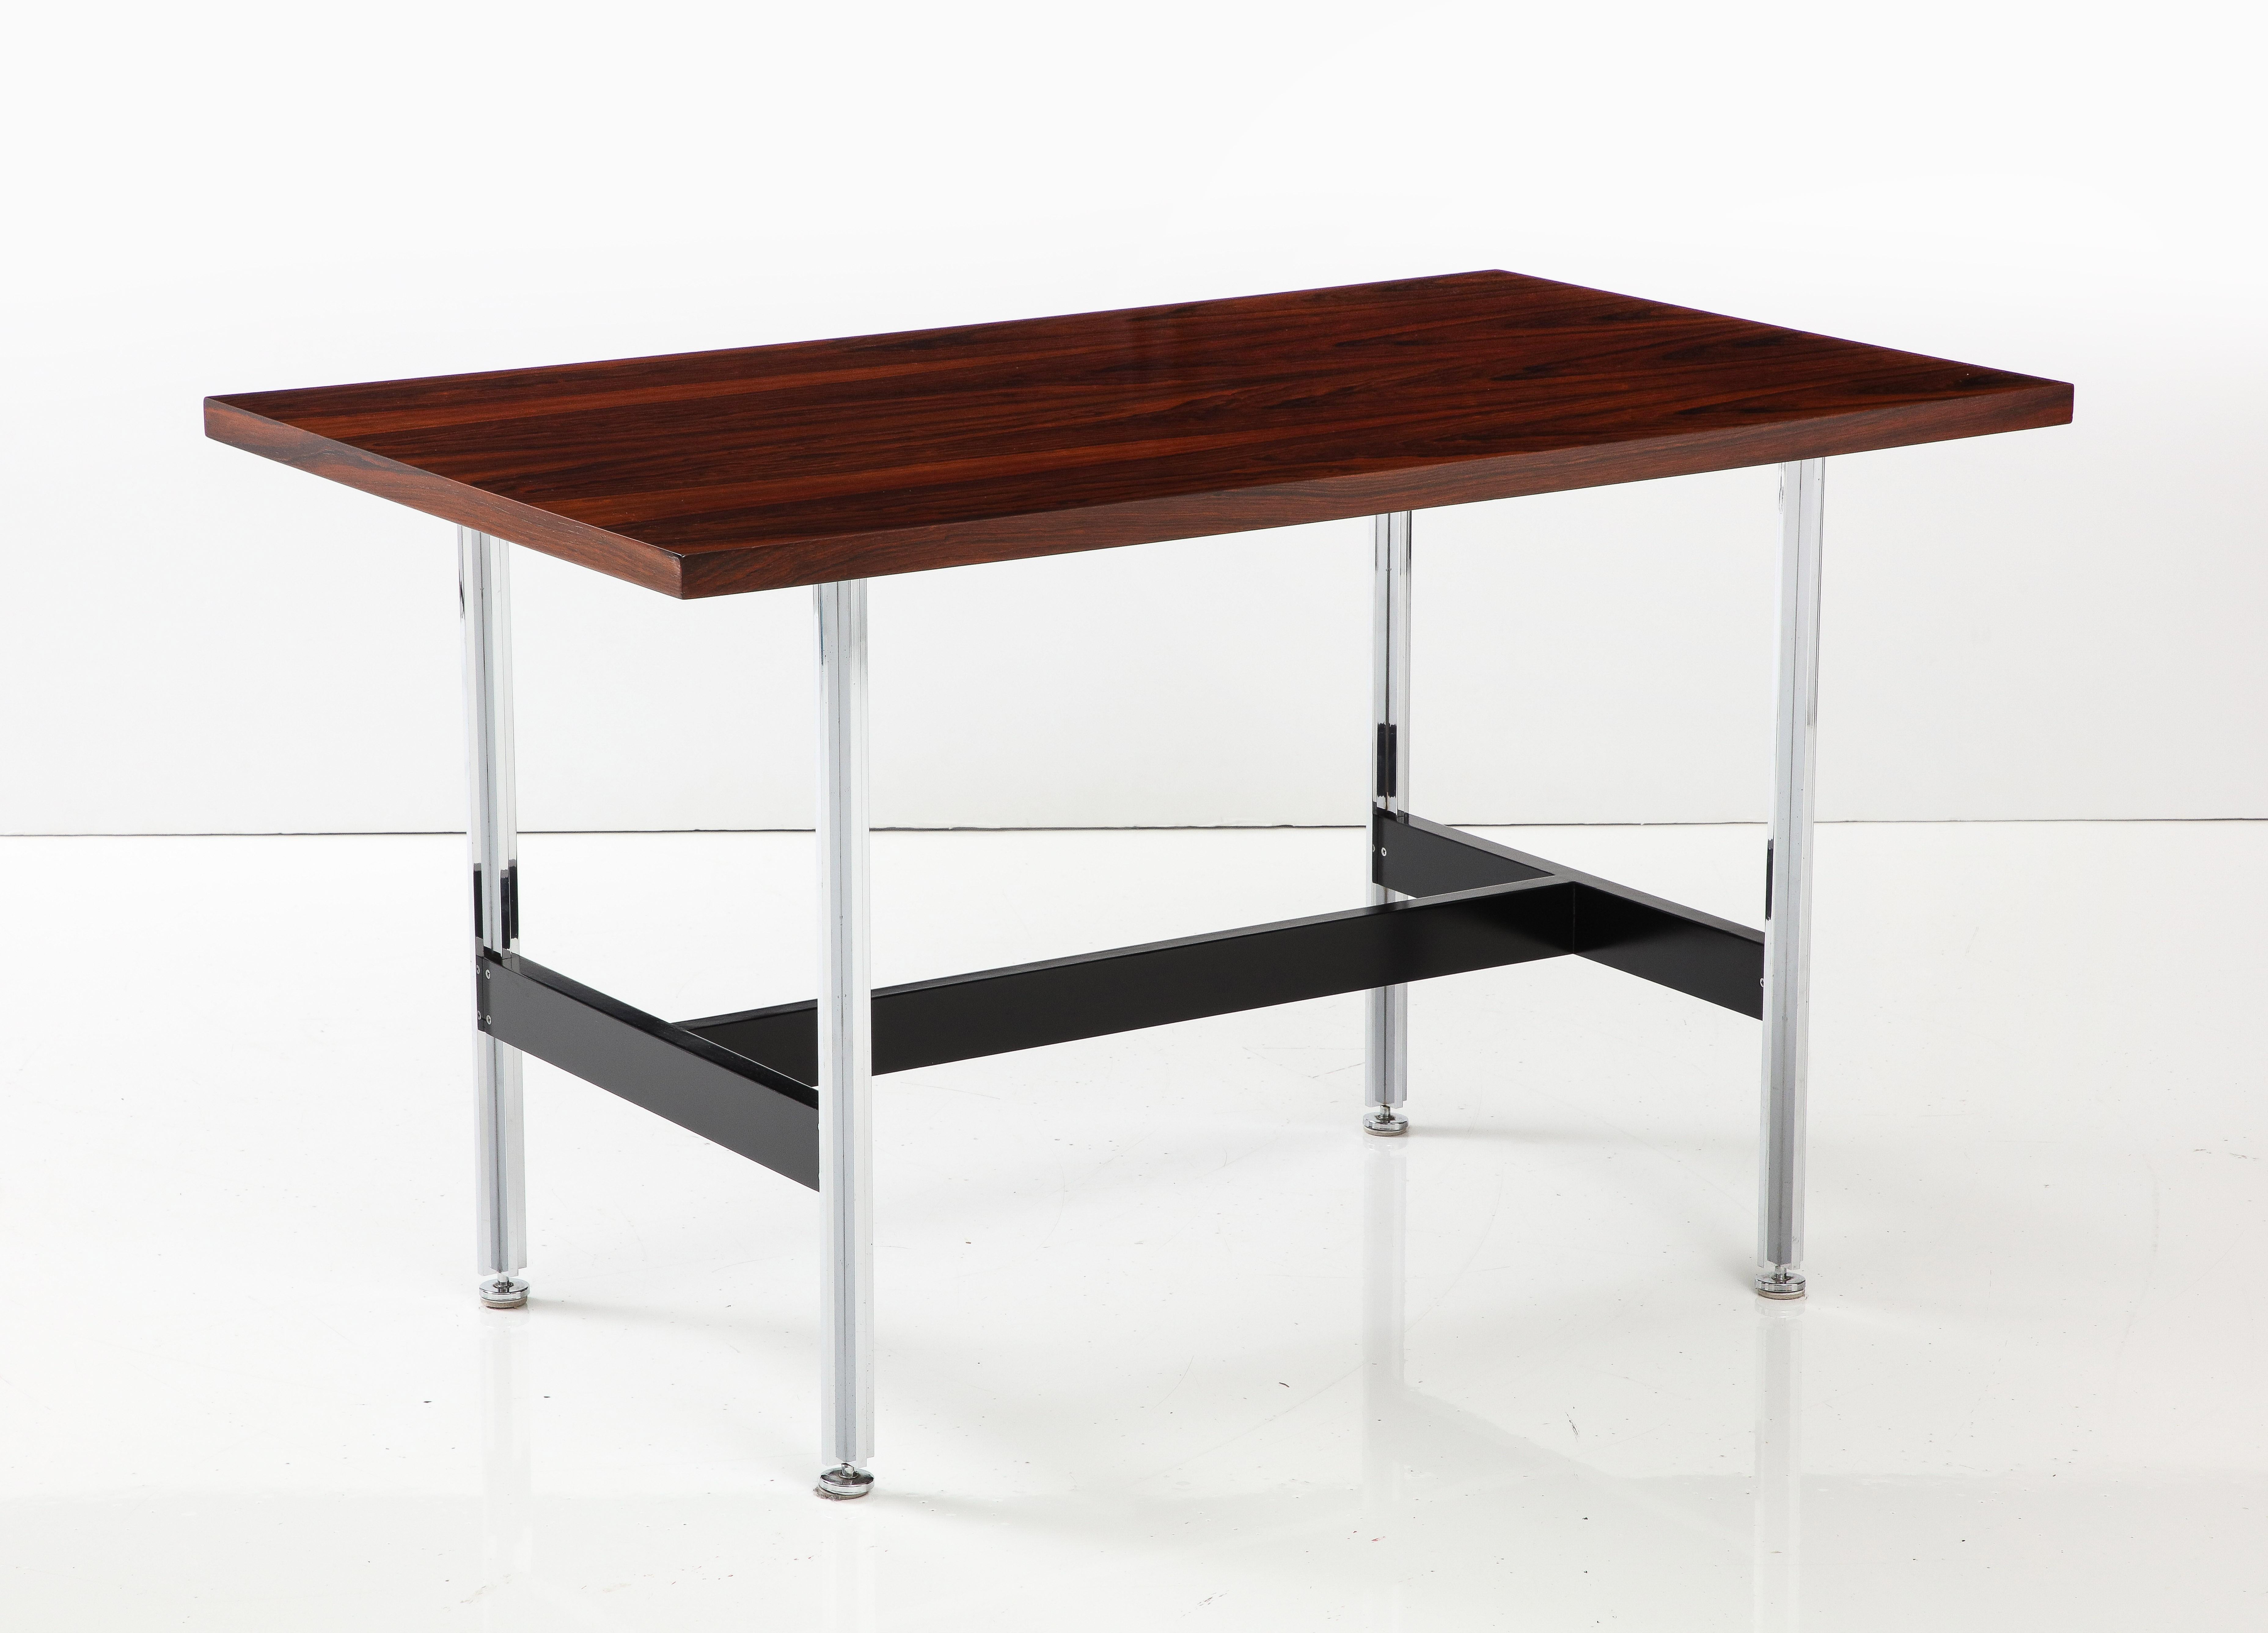 Late 20th Century 1970's Brazilian Rosewood And Steel Desk/Dining table By John Stuart For Sale